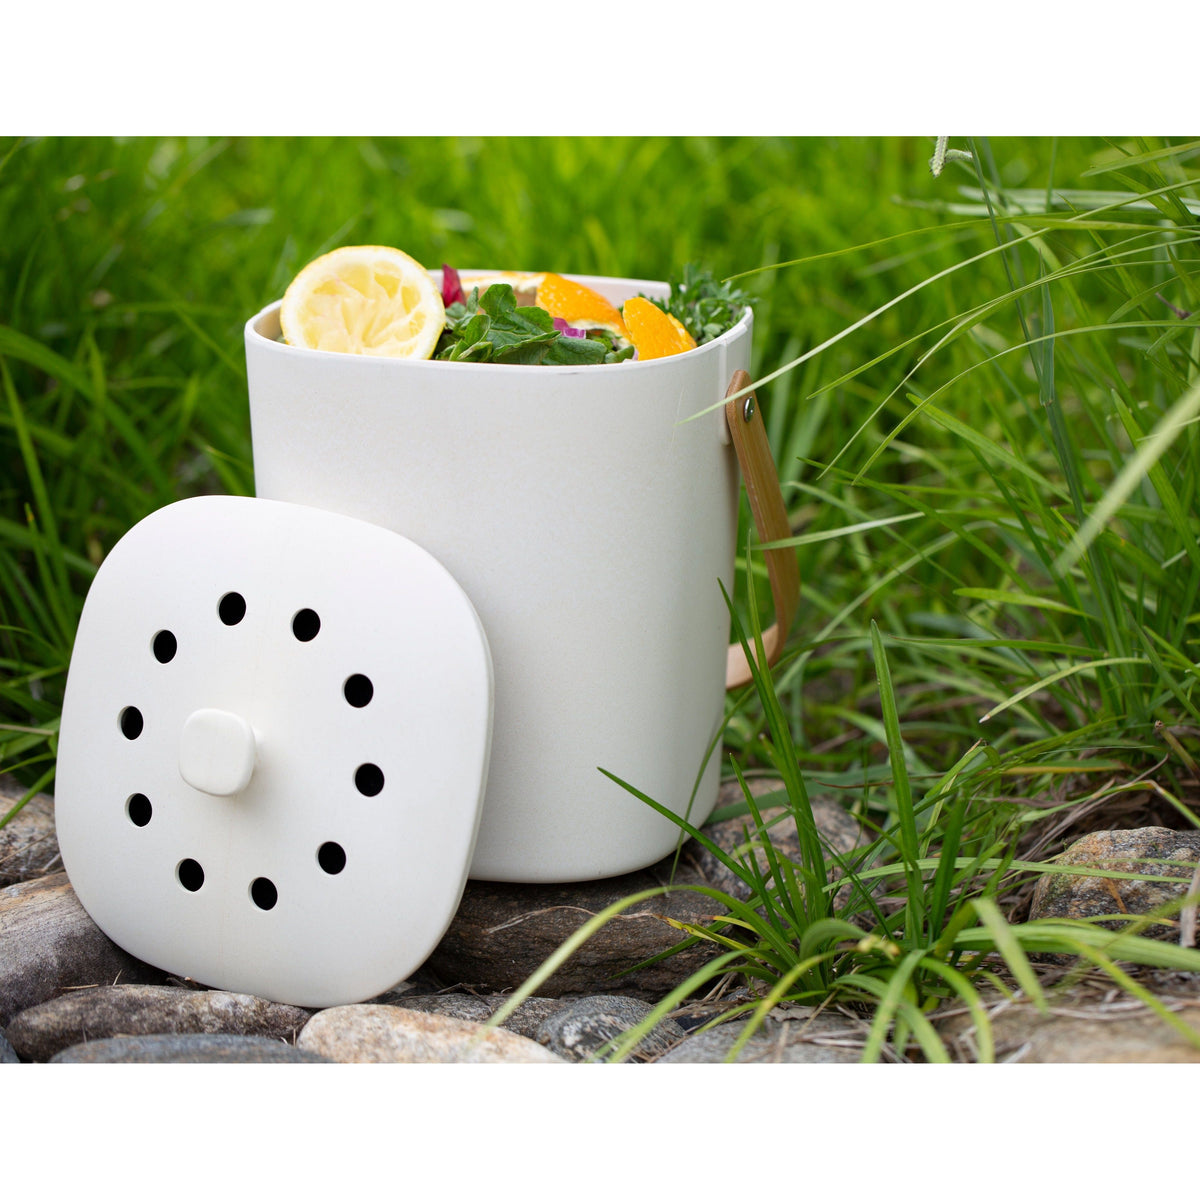 Bamboozle Home Composter by Bamboozle Home